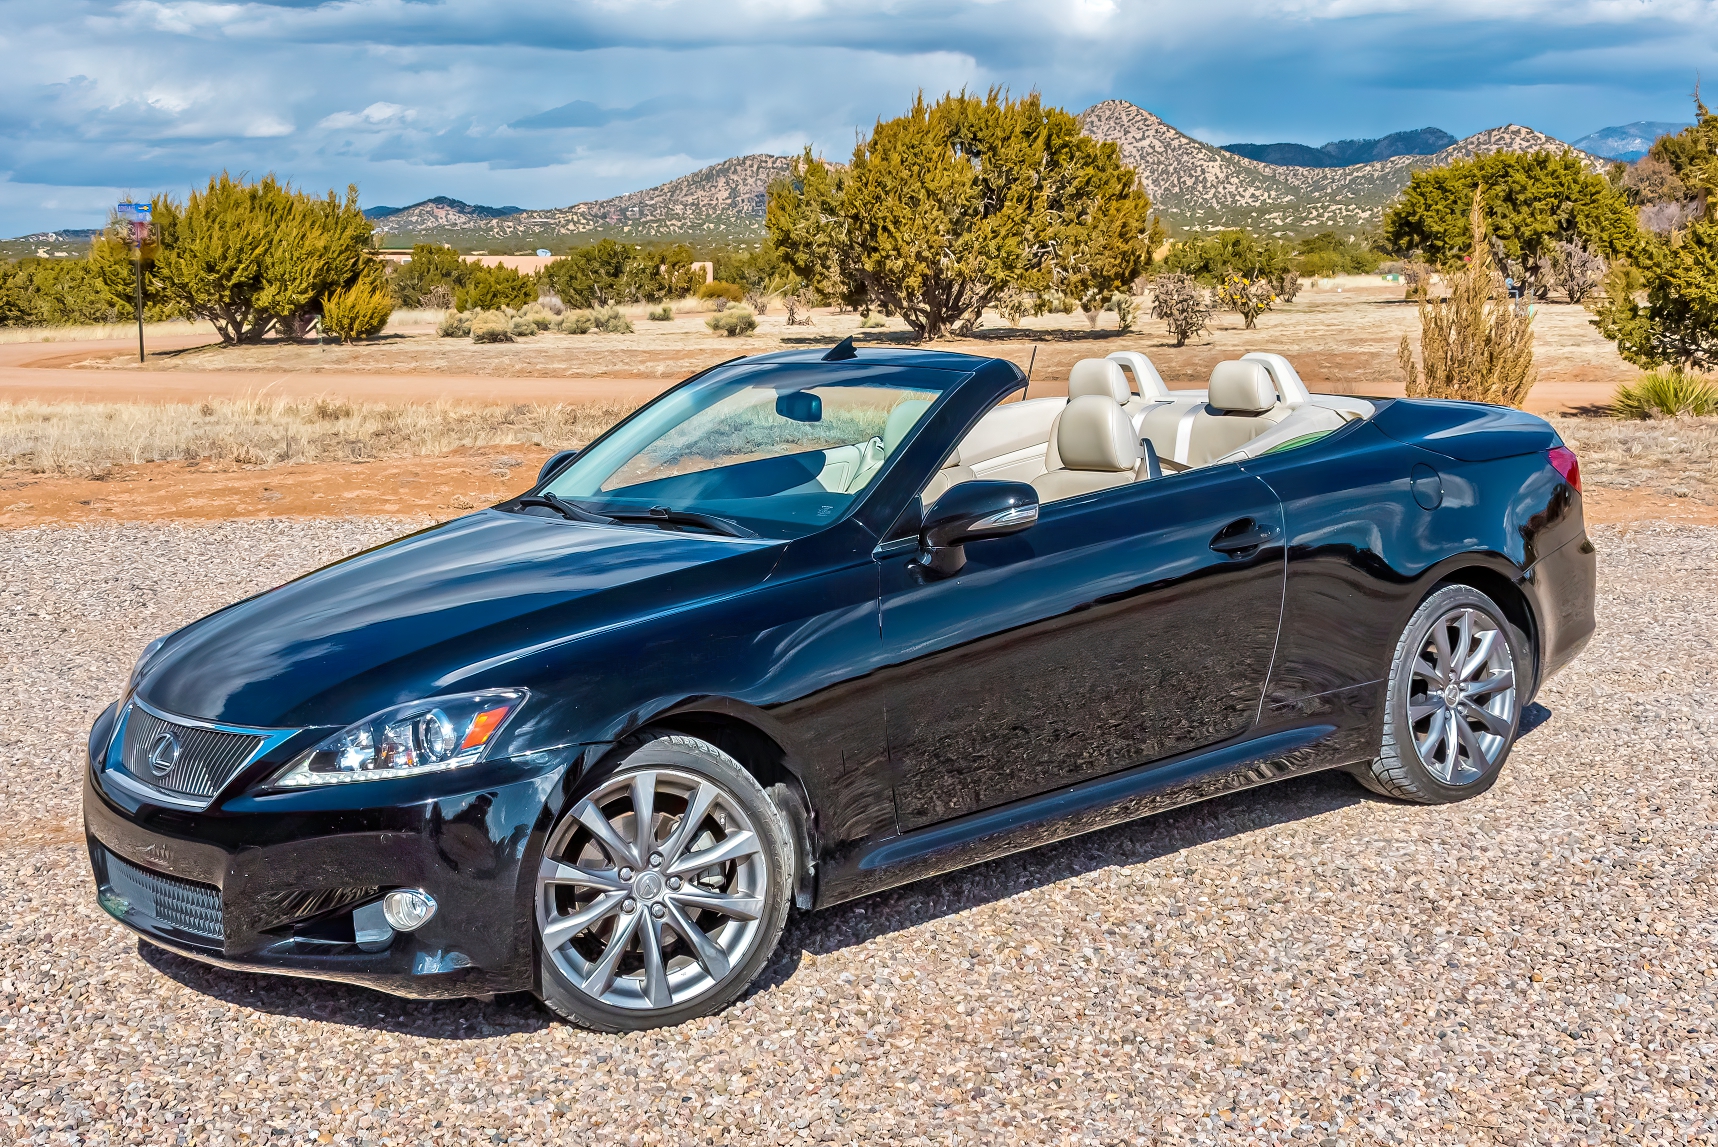 Used 2013 Lexus IS 250C for Sale Right Now - Autotrader